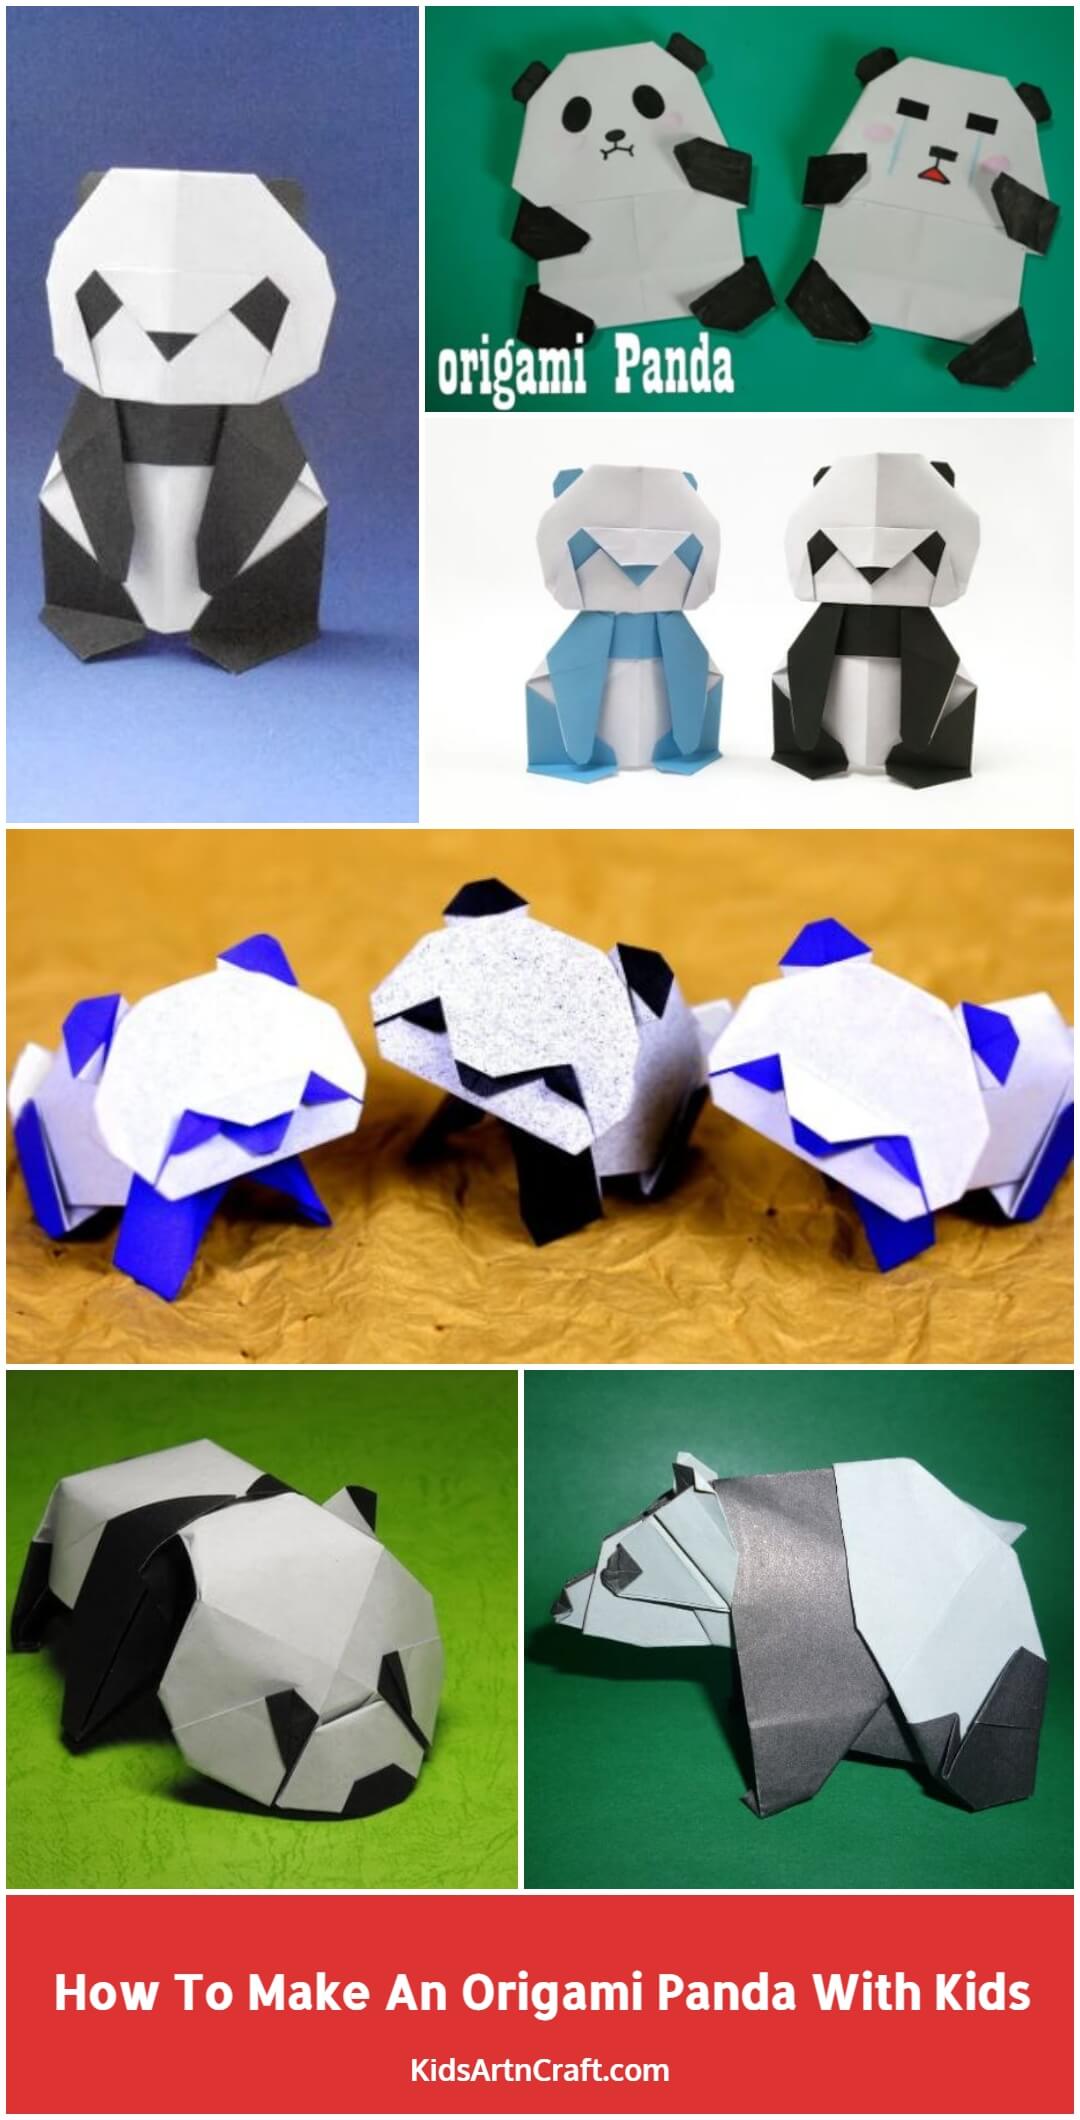 How To Make An Origami Panda With Kids